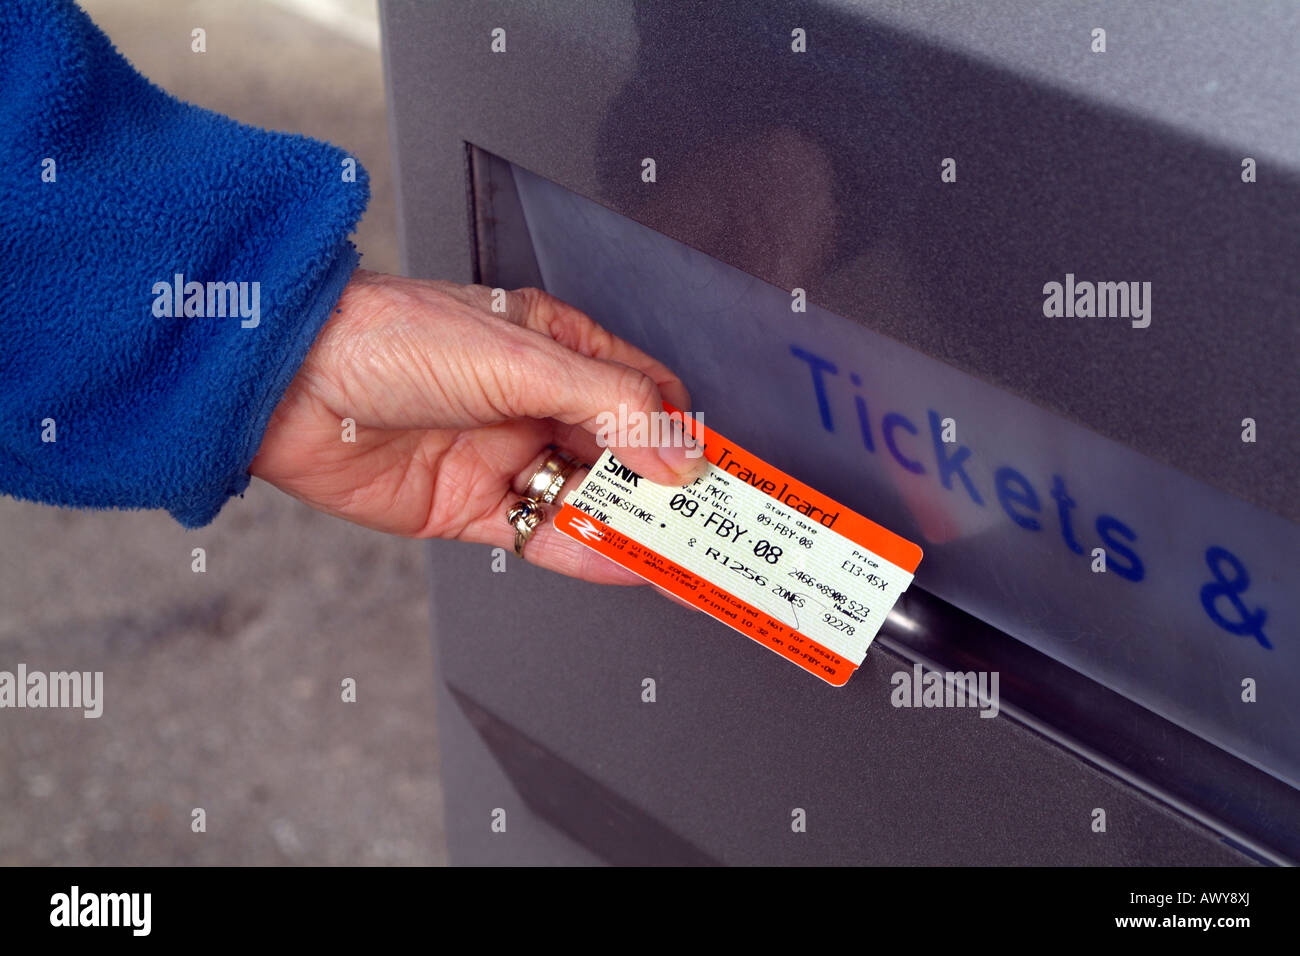 Customers Hand with Two Part Return Tickets for use with South West Trains Self Service Railway Ticket Machine Dispenser Stock Photo